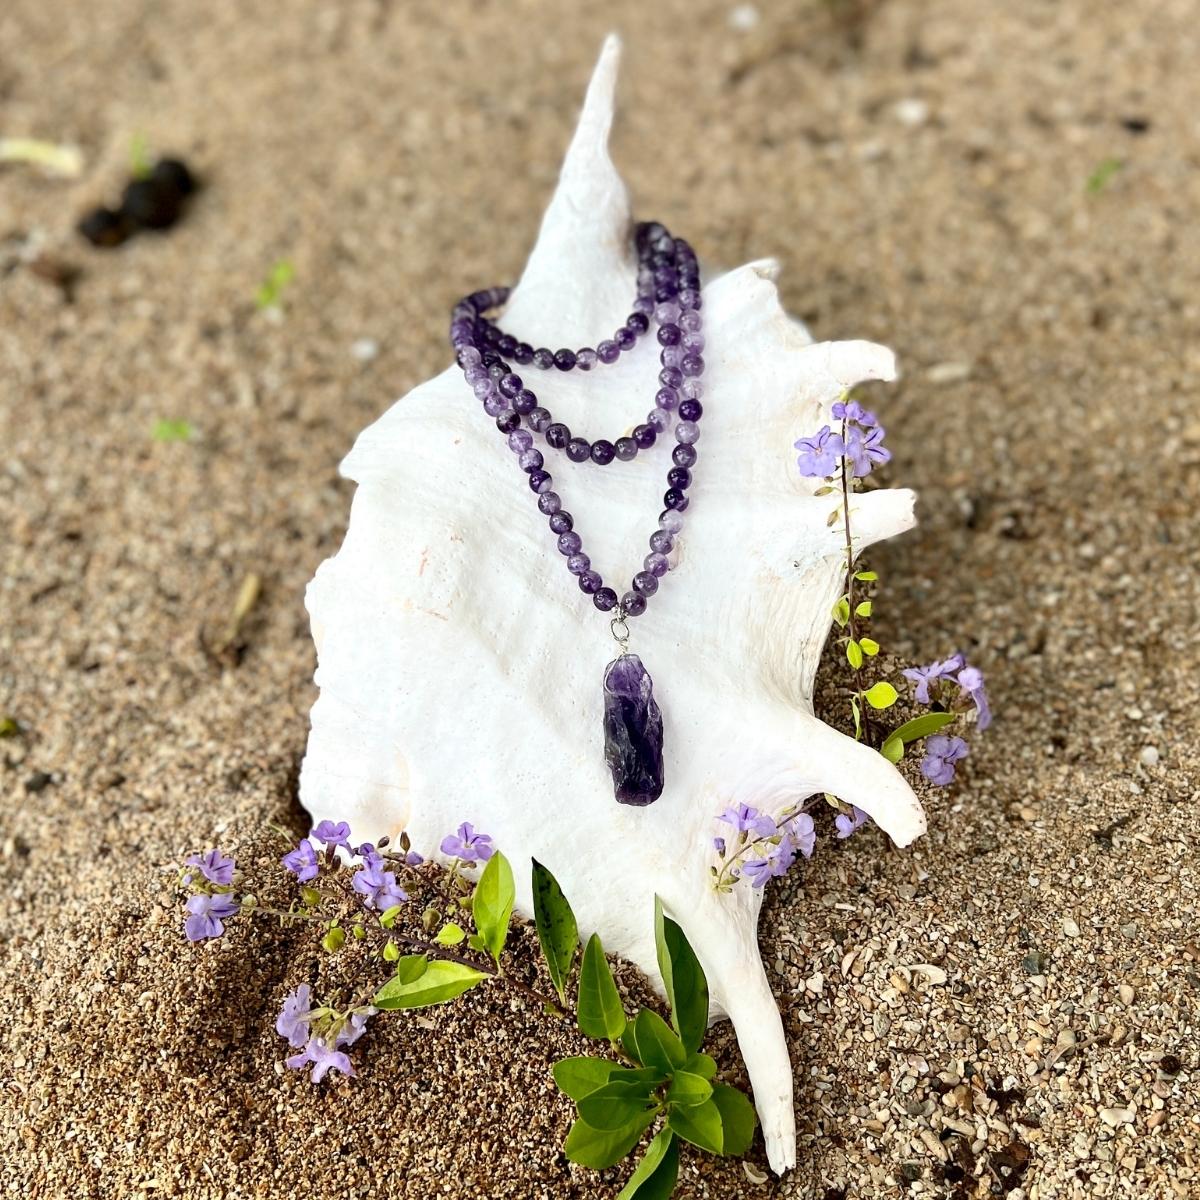 Rustic Amethyst Crystal Necklace to Help Reduce Stress, Emotional Stability and Inner Strength, a great crystal to Help Make Good Decisions